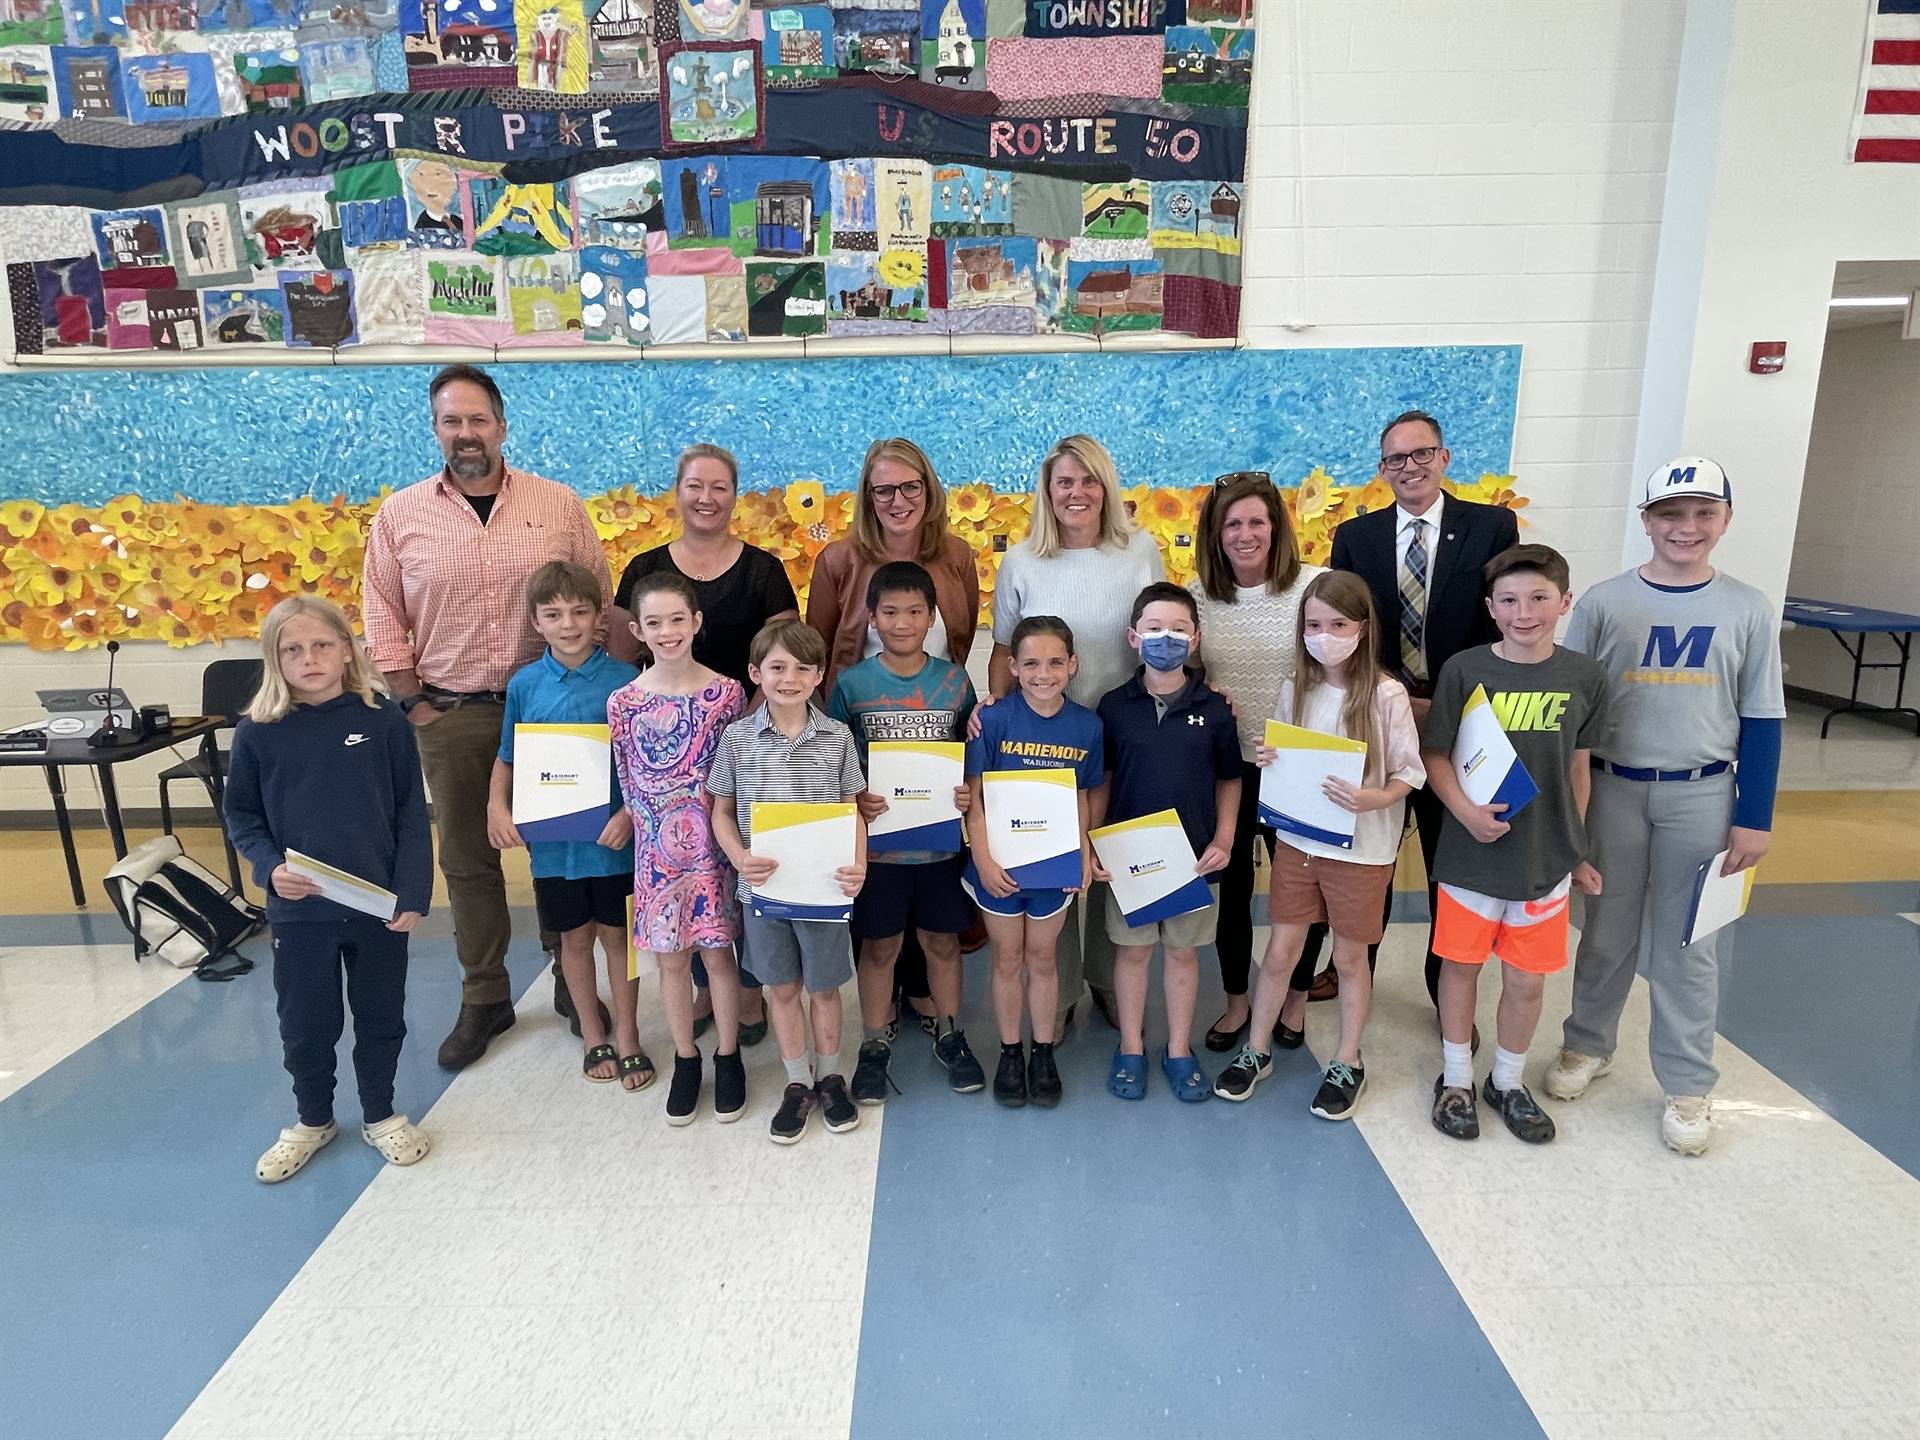 Student recognitions with the Board of Education